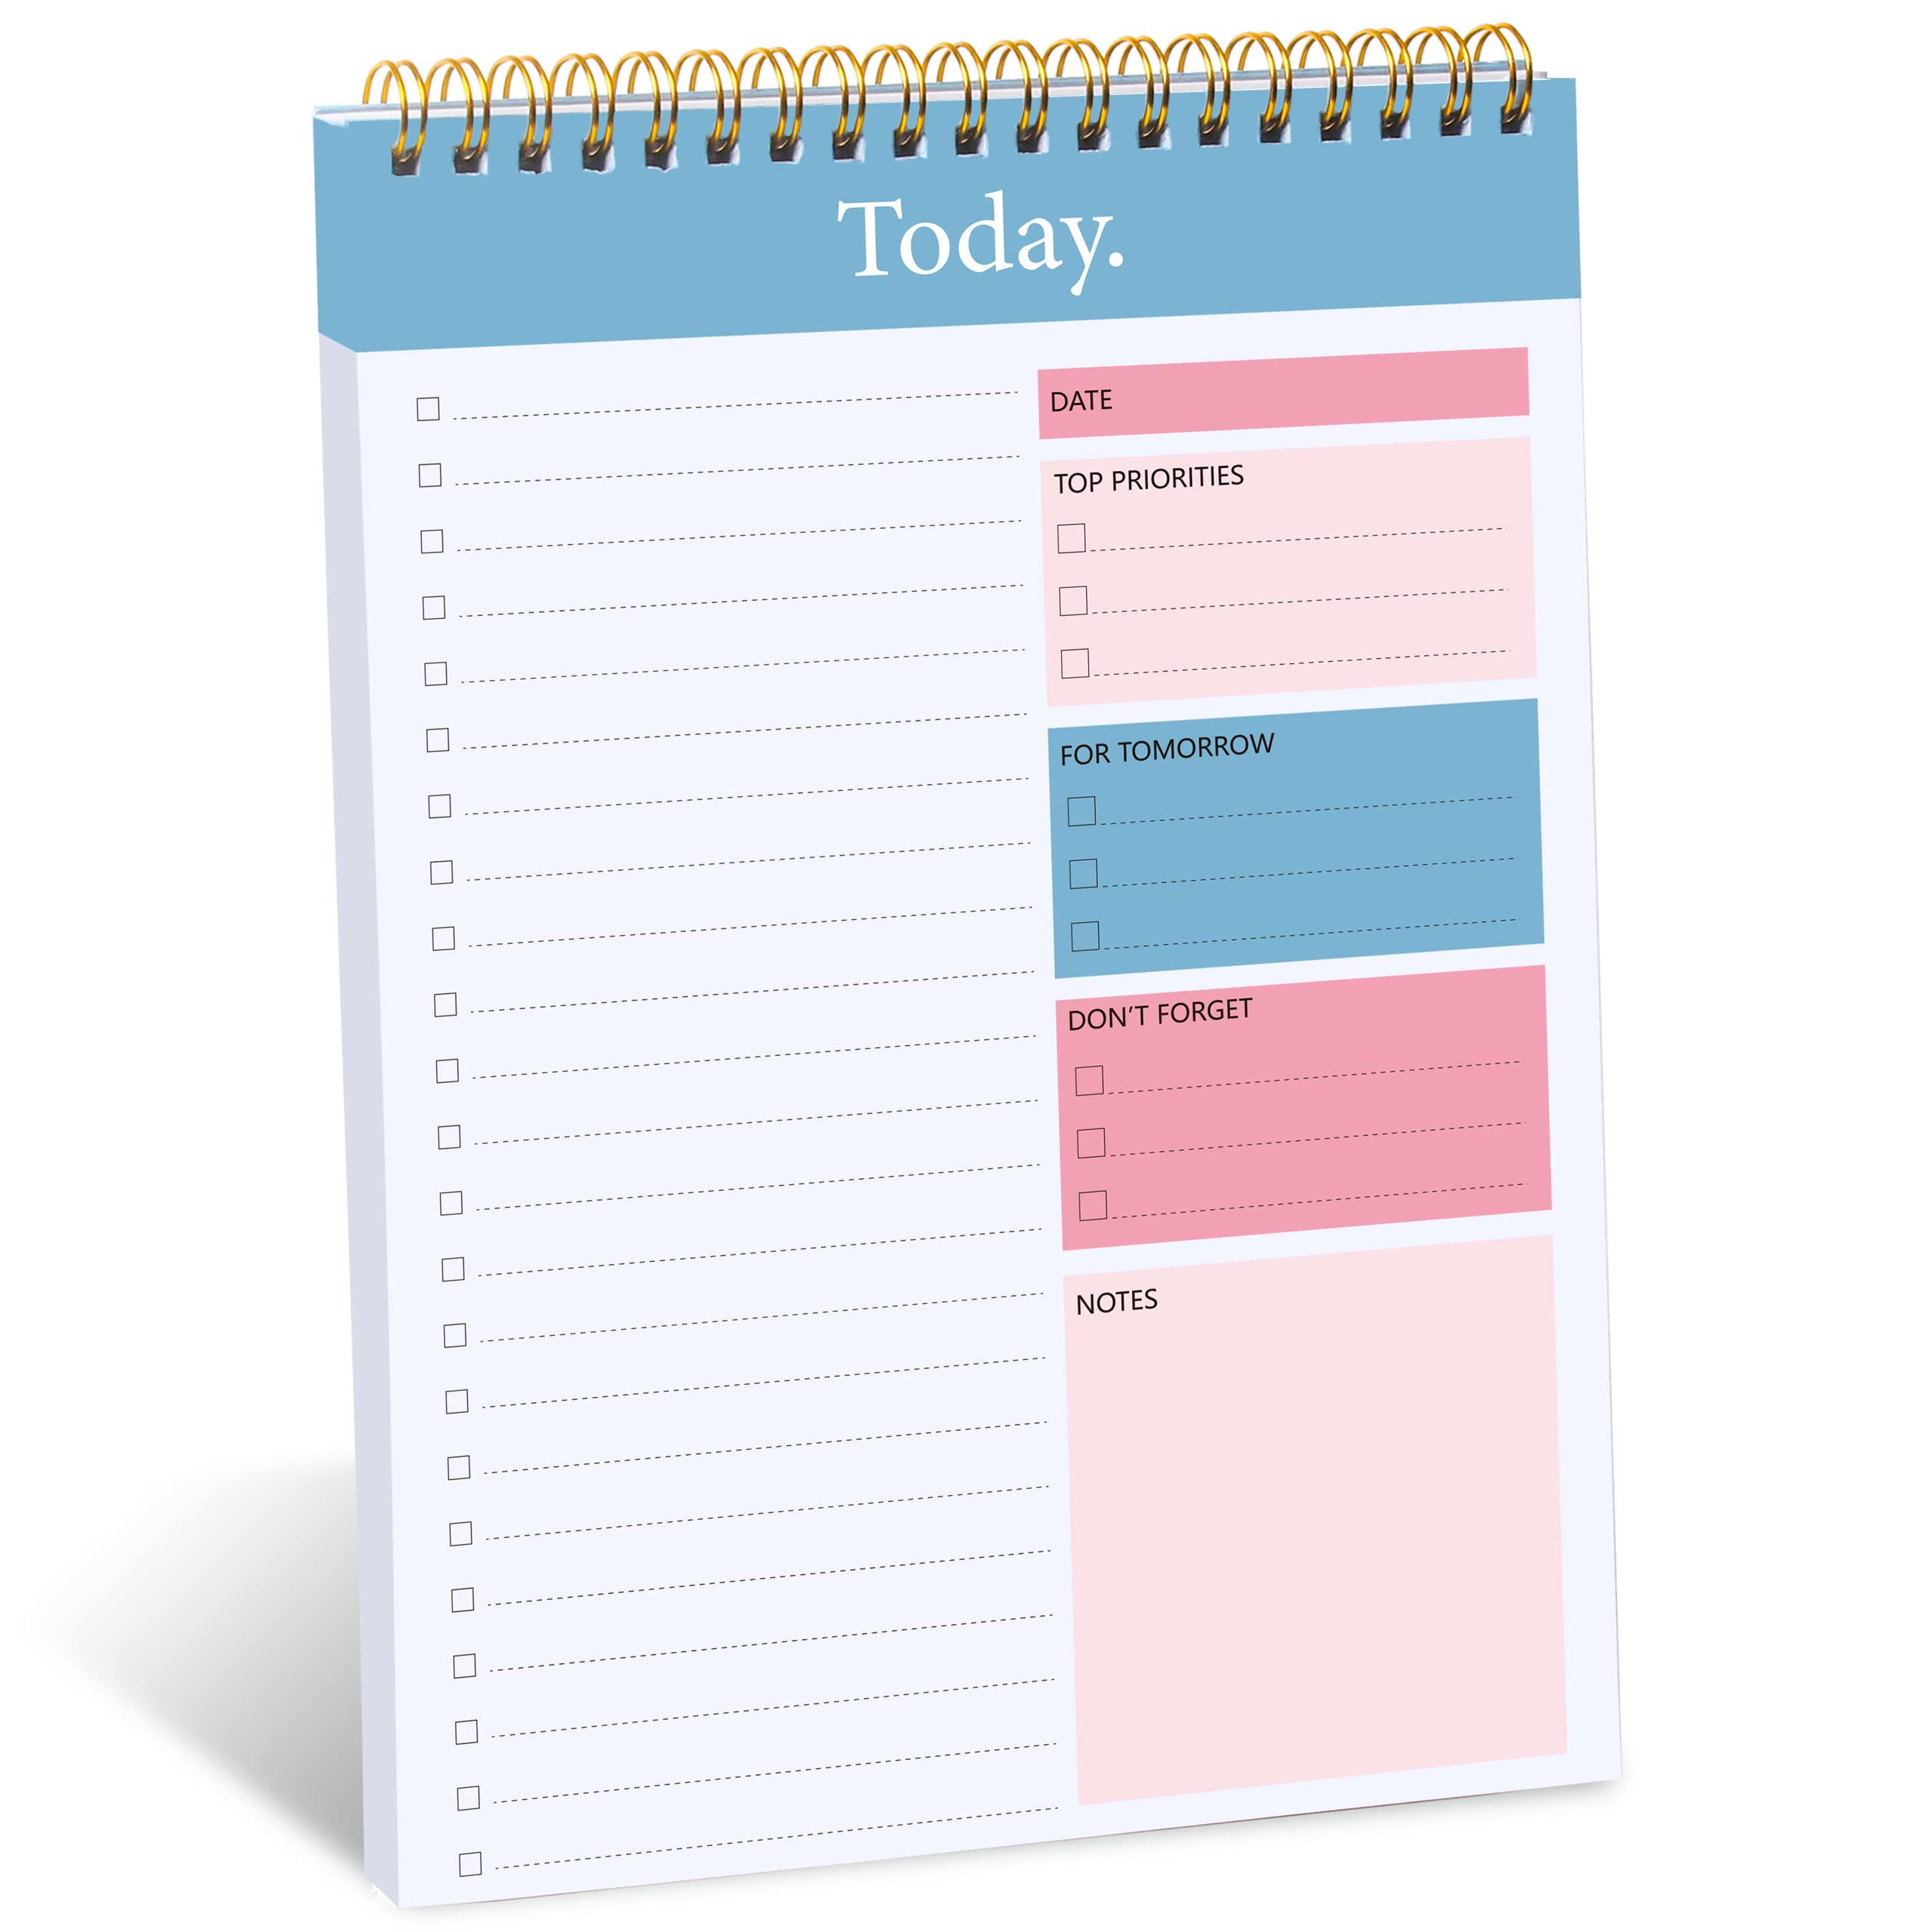 Daily planner or to-do list